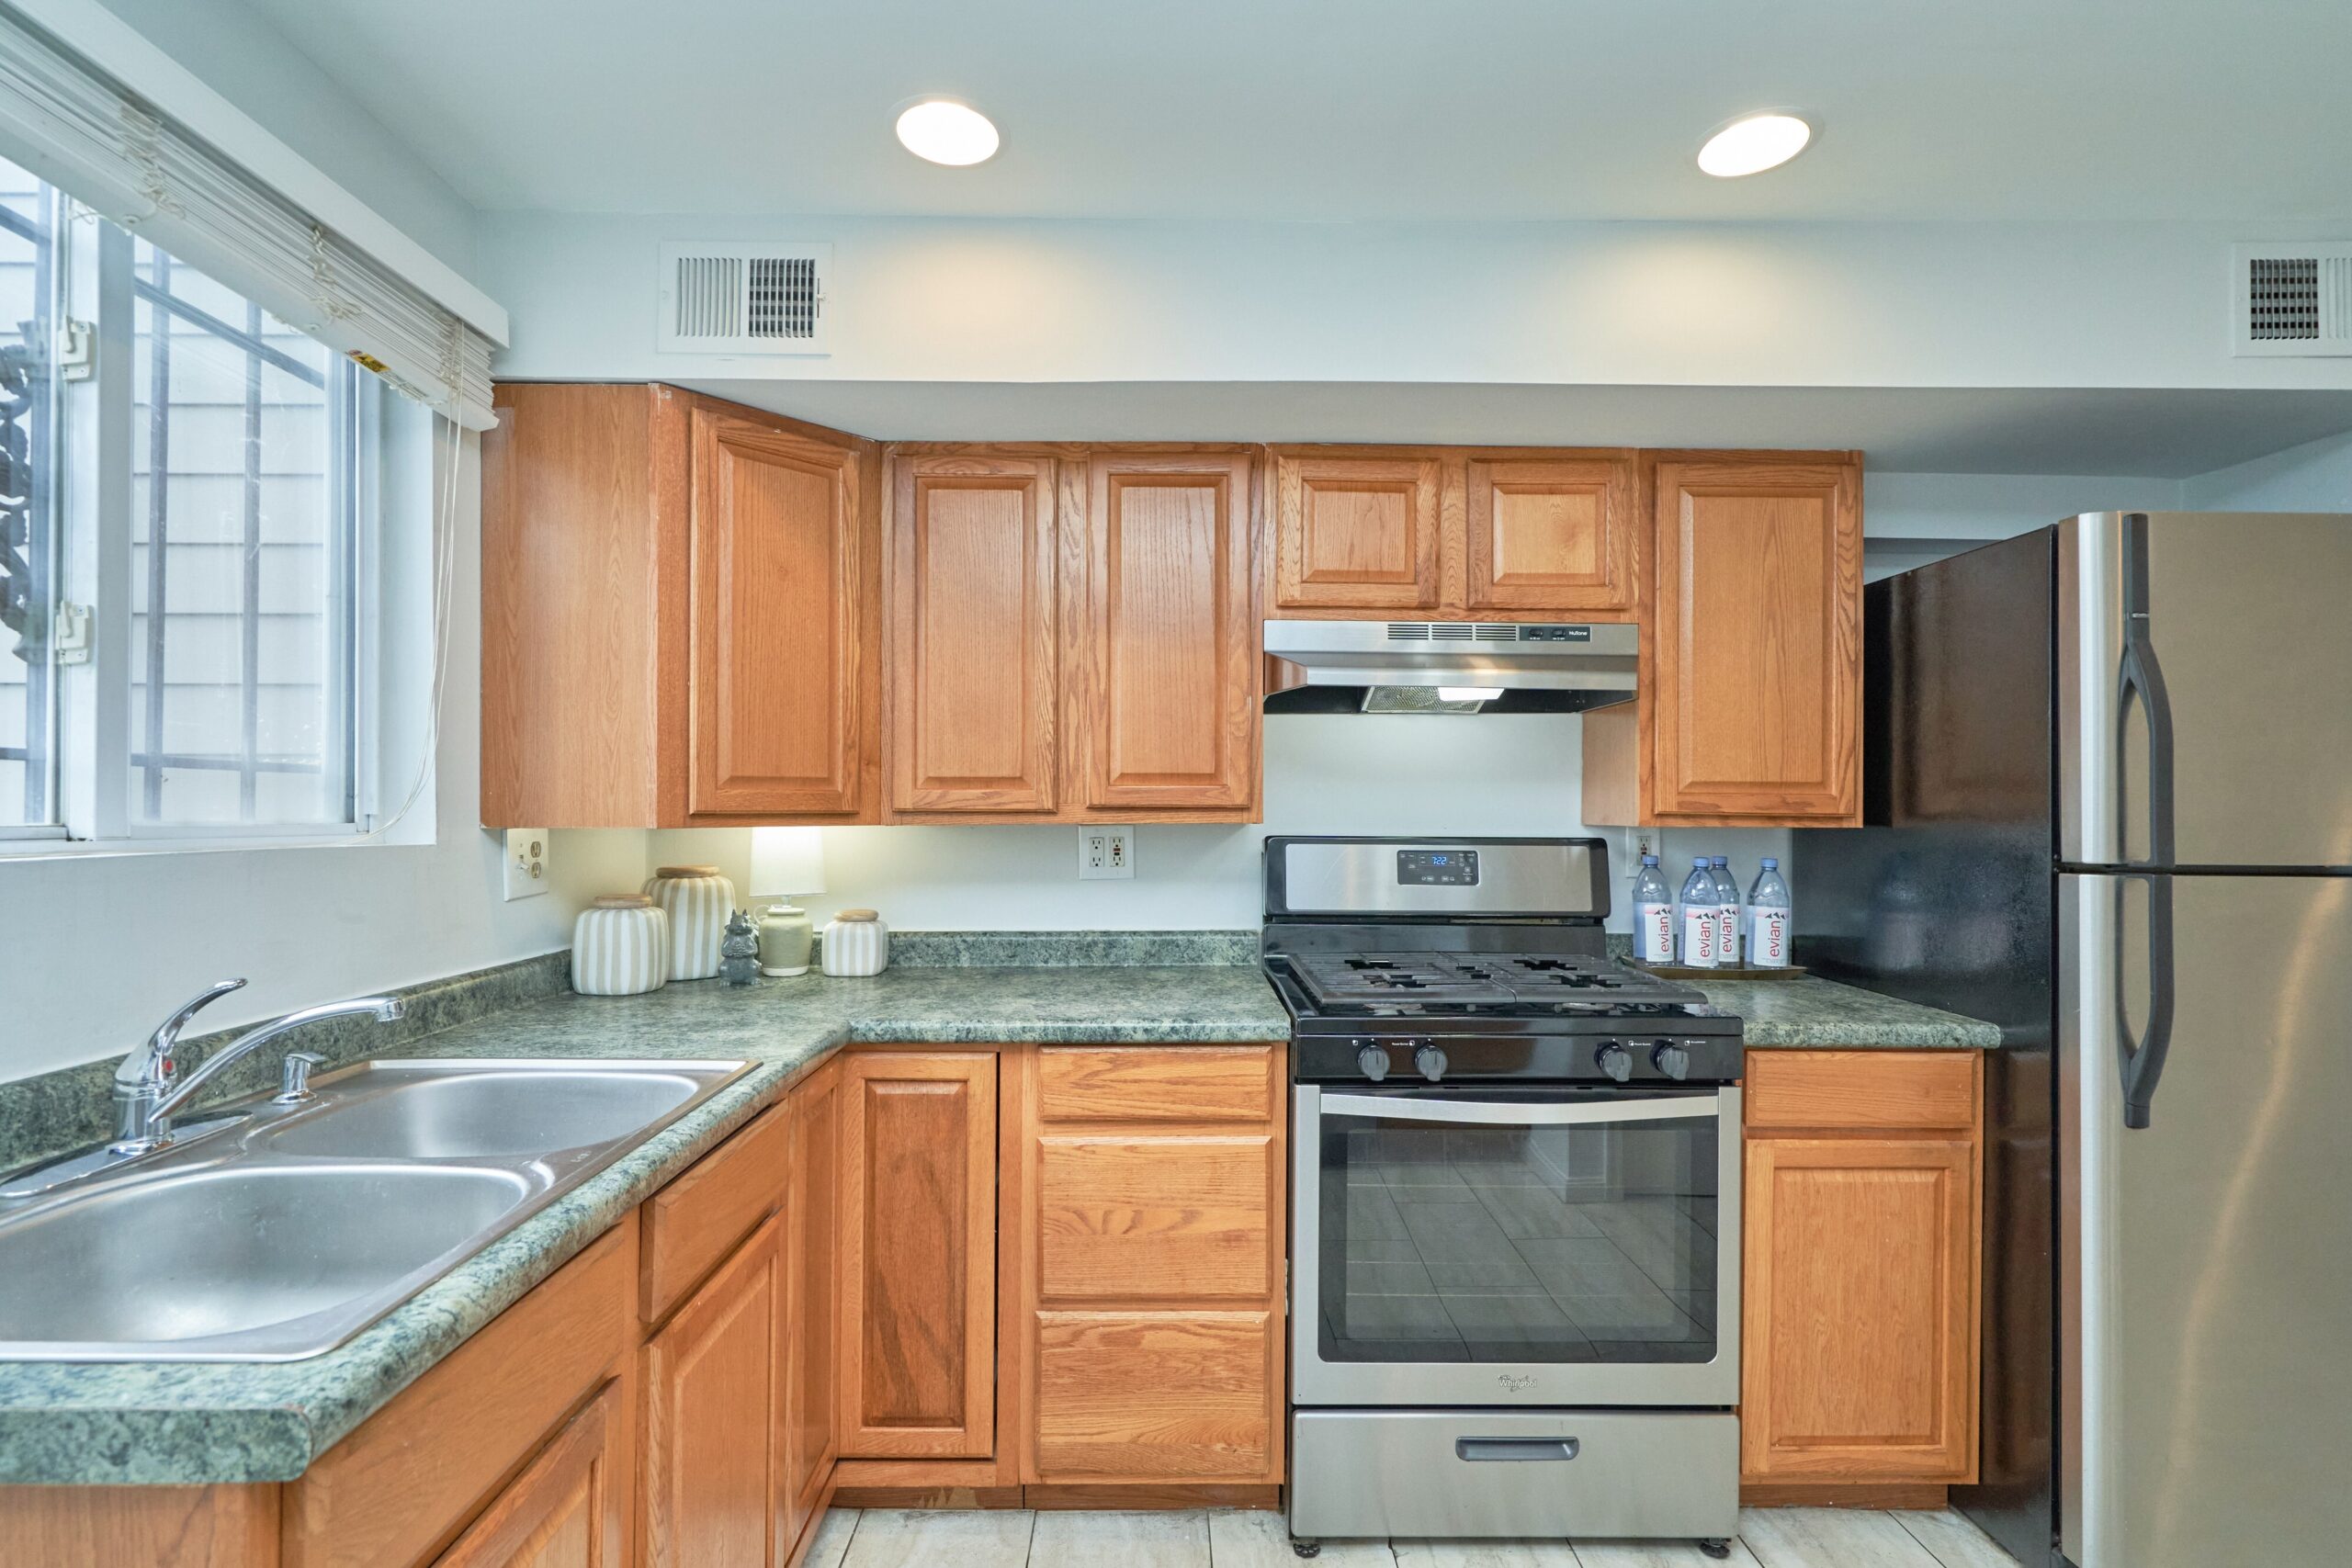 Professional interior photo of 1313 K Street SE, Washington, DC - showing the kitchen with walnut cabinets and stainless appliances 